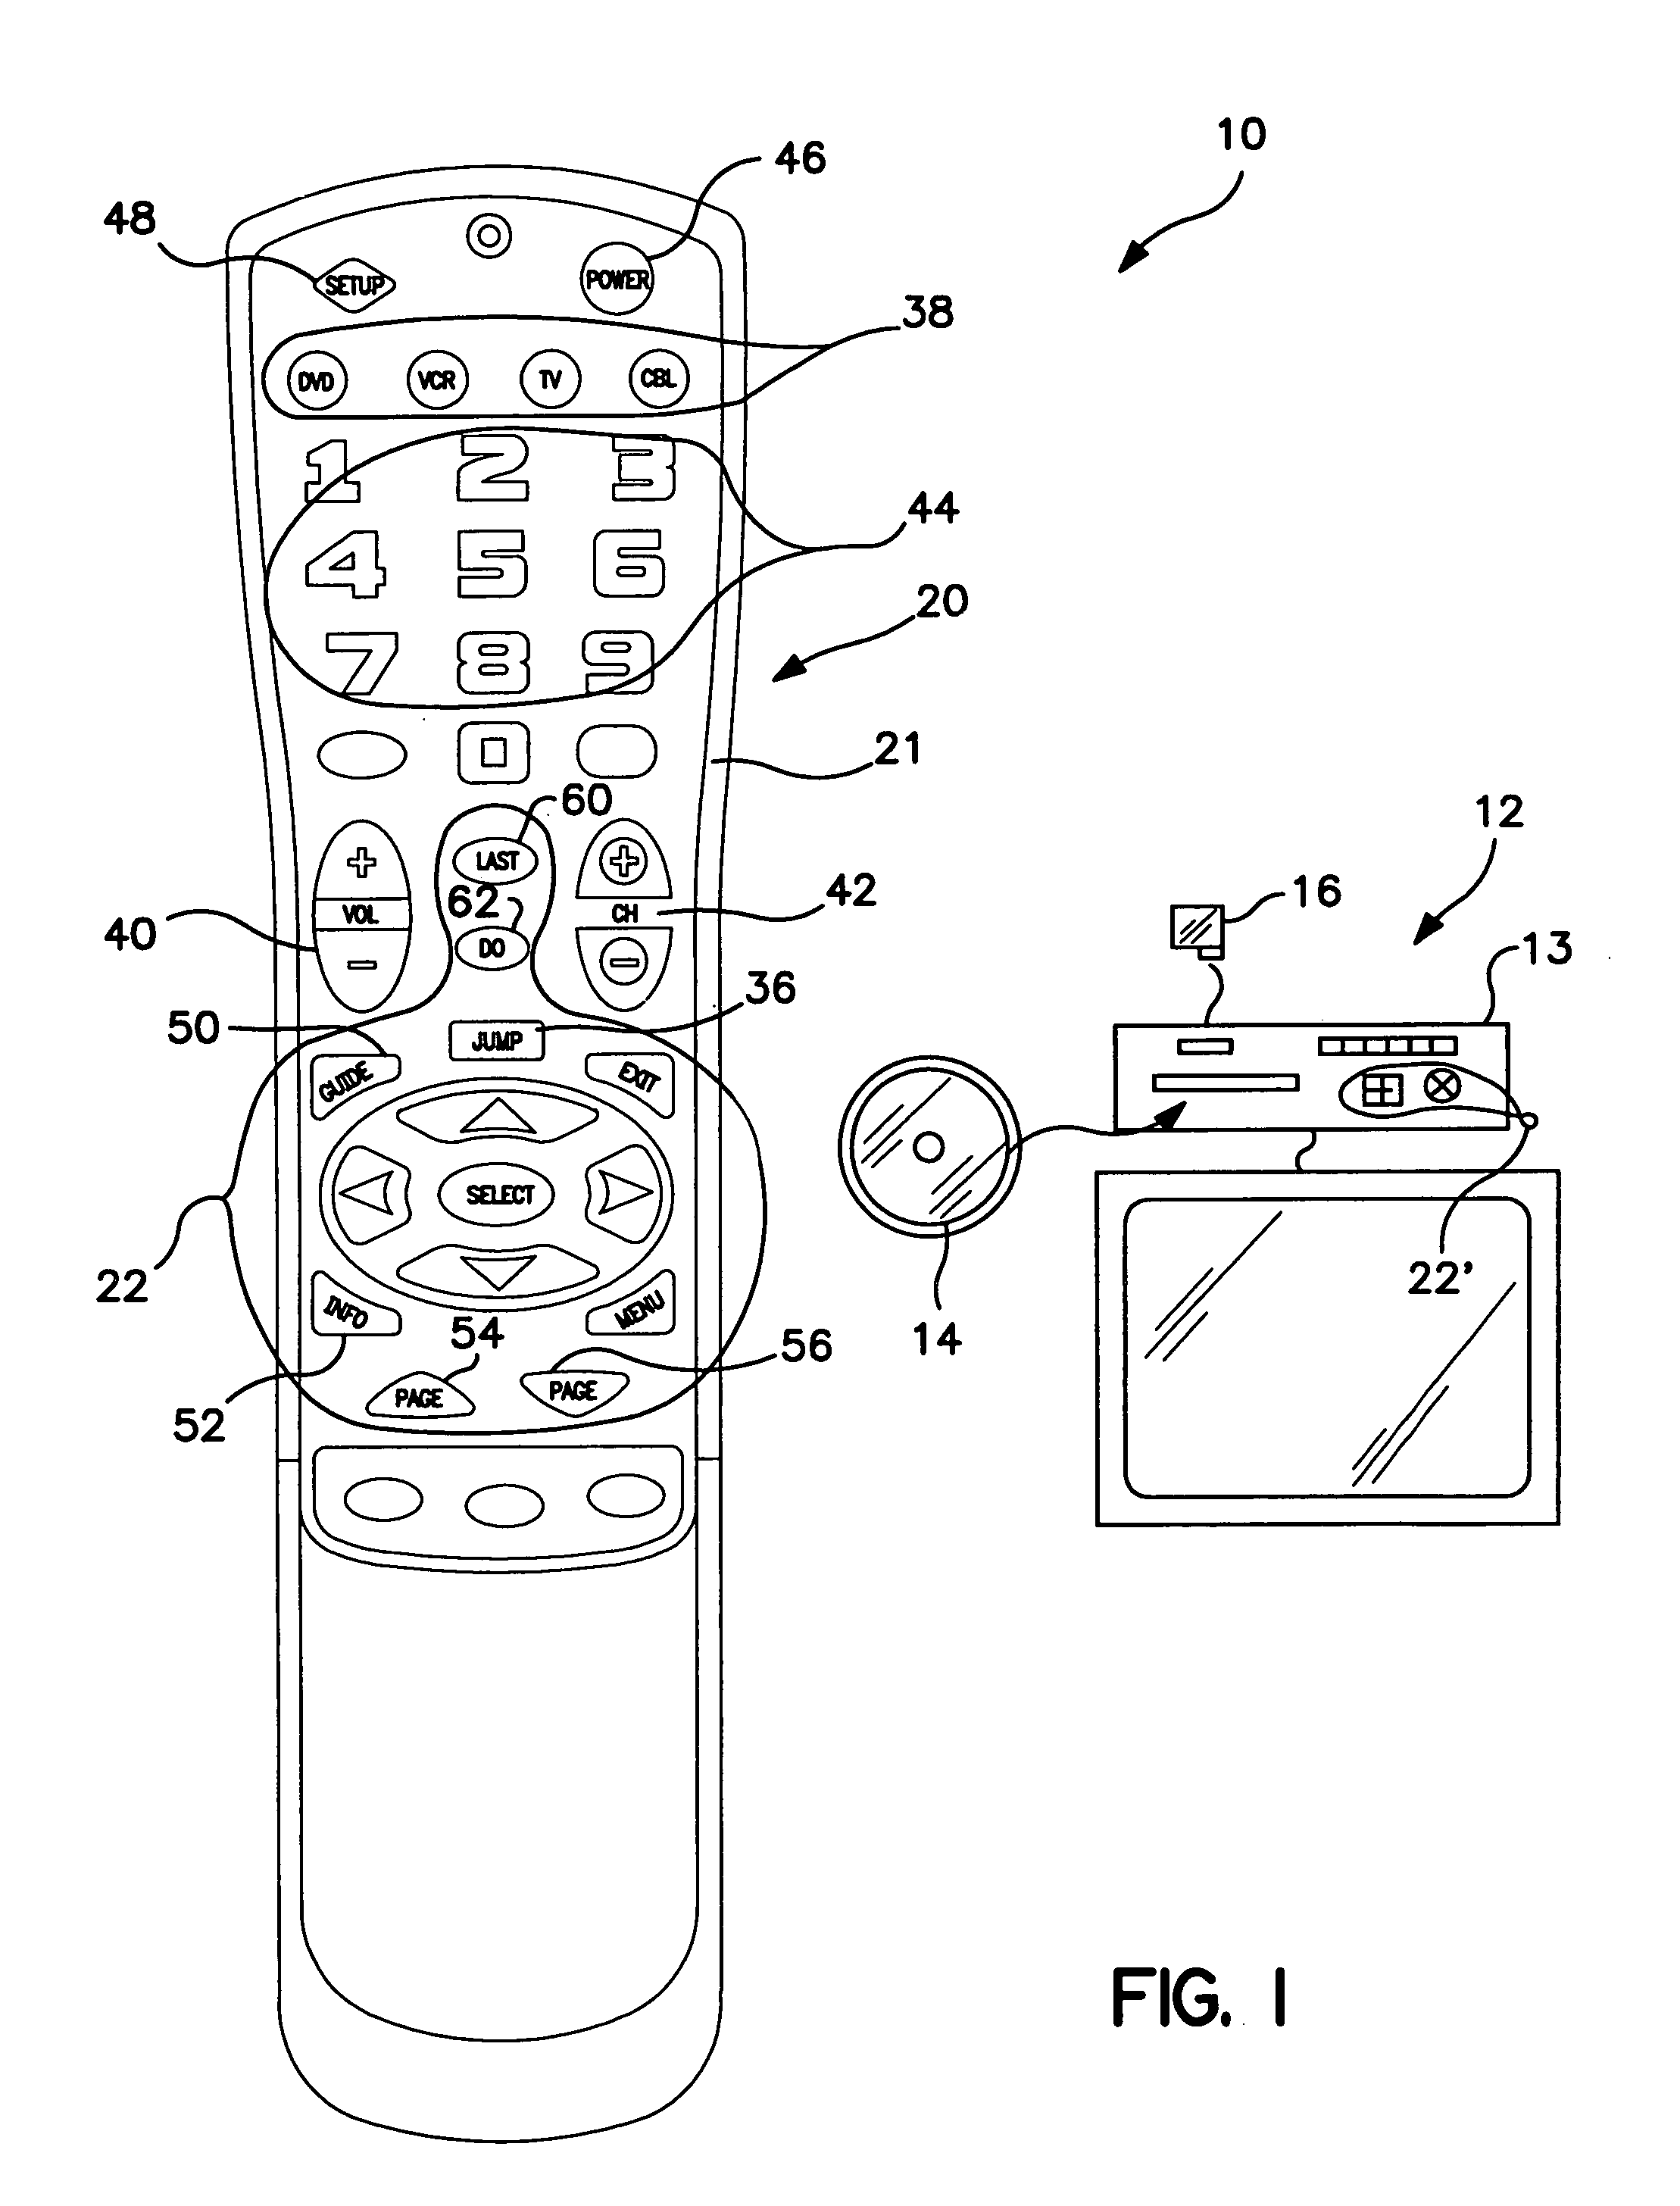 Consumer electronic navigation system and methods related thereto